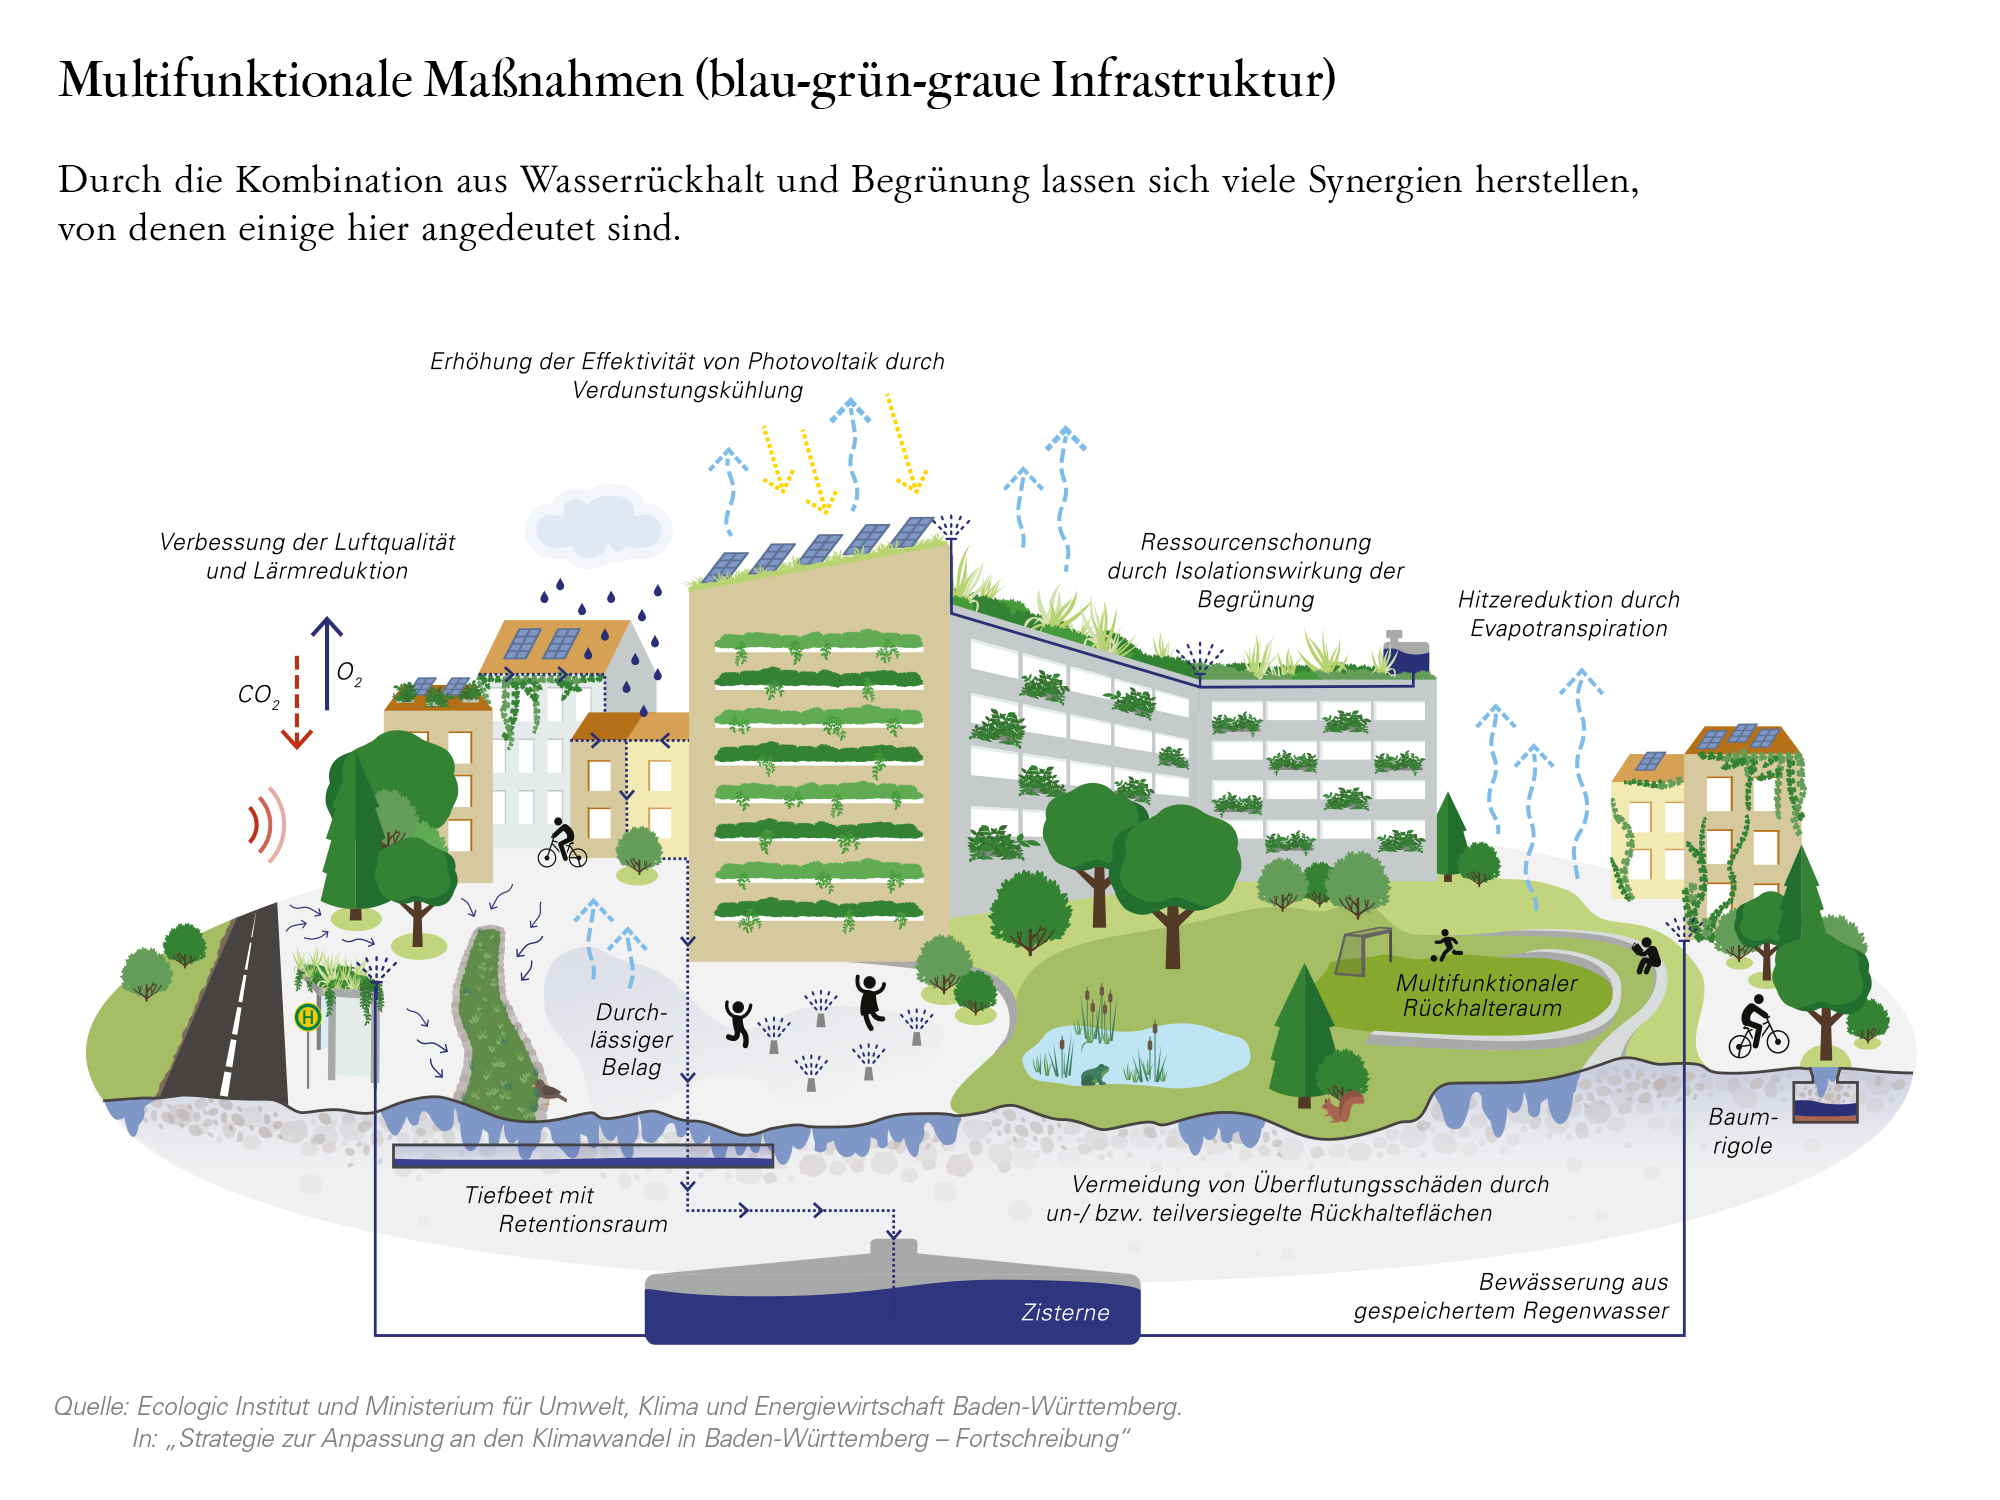 Illustration of multifunctional measures for urban infrastructure that combine water retention and greening. It shows green roofs, green facades, photovoltaic systems, permeable pavements, deep beds with retention space, multifunctional retention areas and a cistern for rainwater utilization. Benefits include improved air quality, noise reduction, heat reduction and resource conservation. Source: Ecologic Institute and Baden-Württemberg Ministry of the Environment.